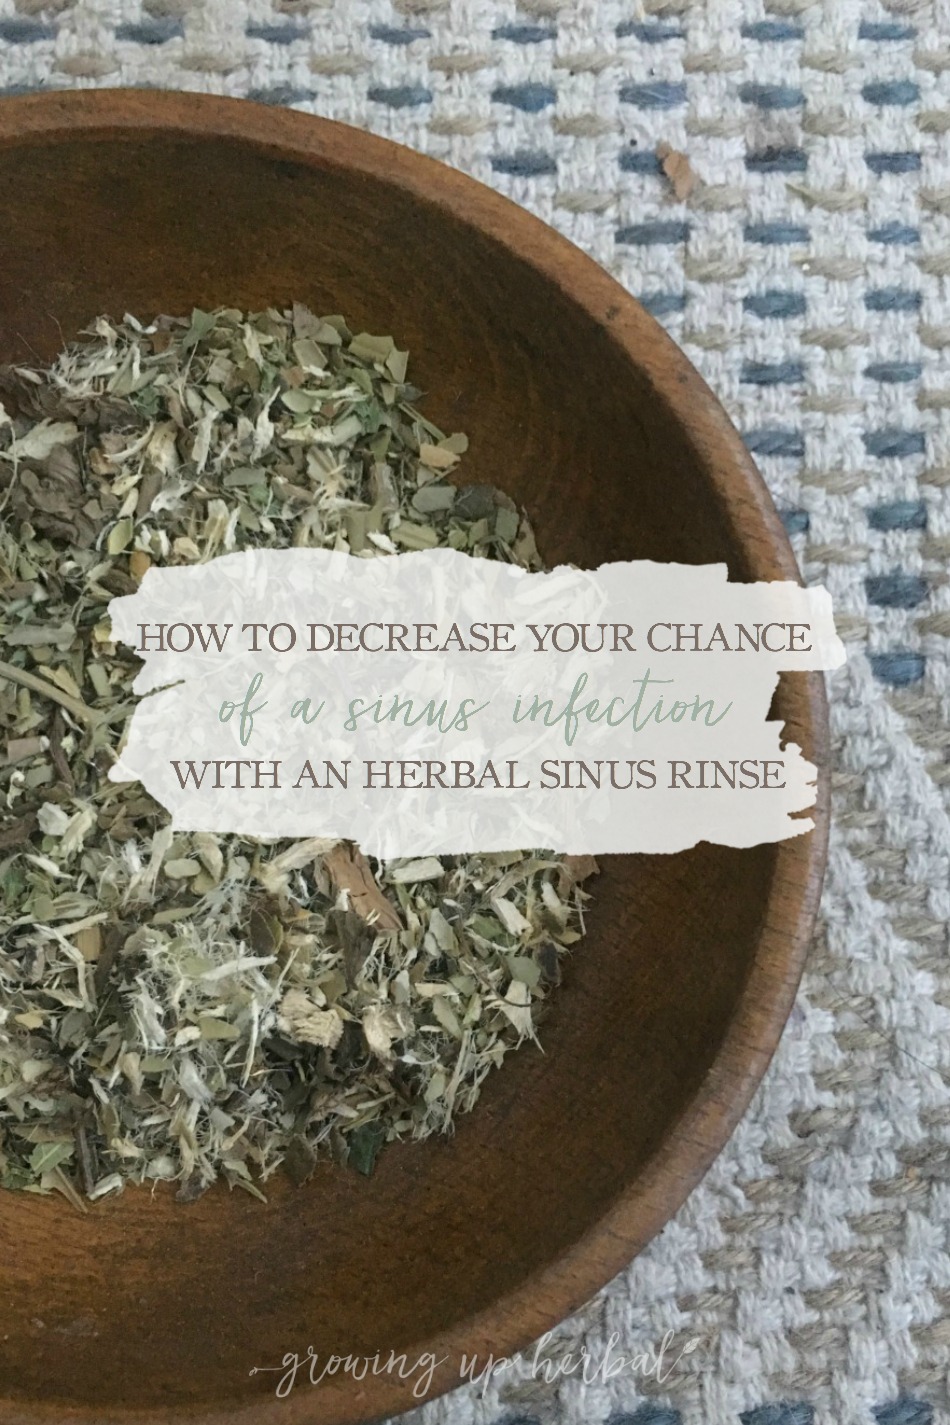 How To Decrease Your Chance Of A Sinus Infection With An Herbal Sinus Rinse | Growing Up Herbal | If sinus issues are a common occurrence for you, here’s an herbal remedy that can offer you some much needed relief.